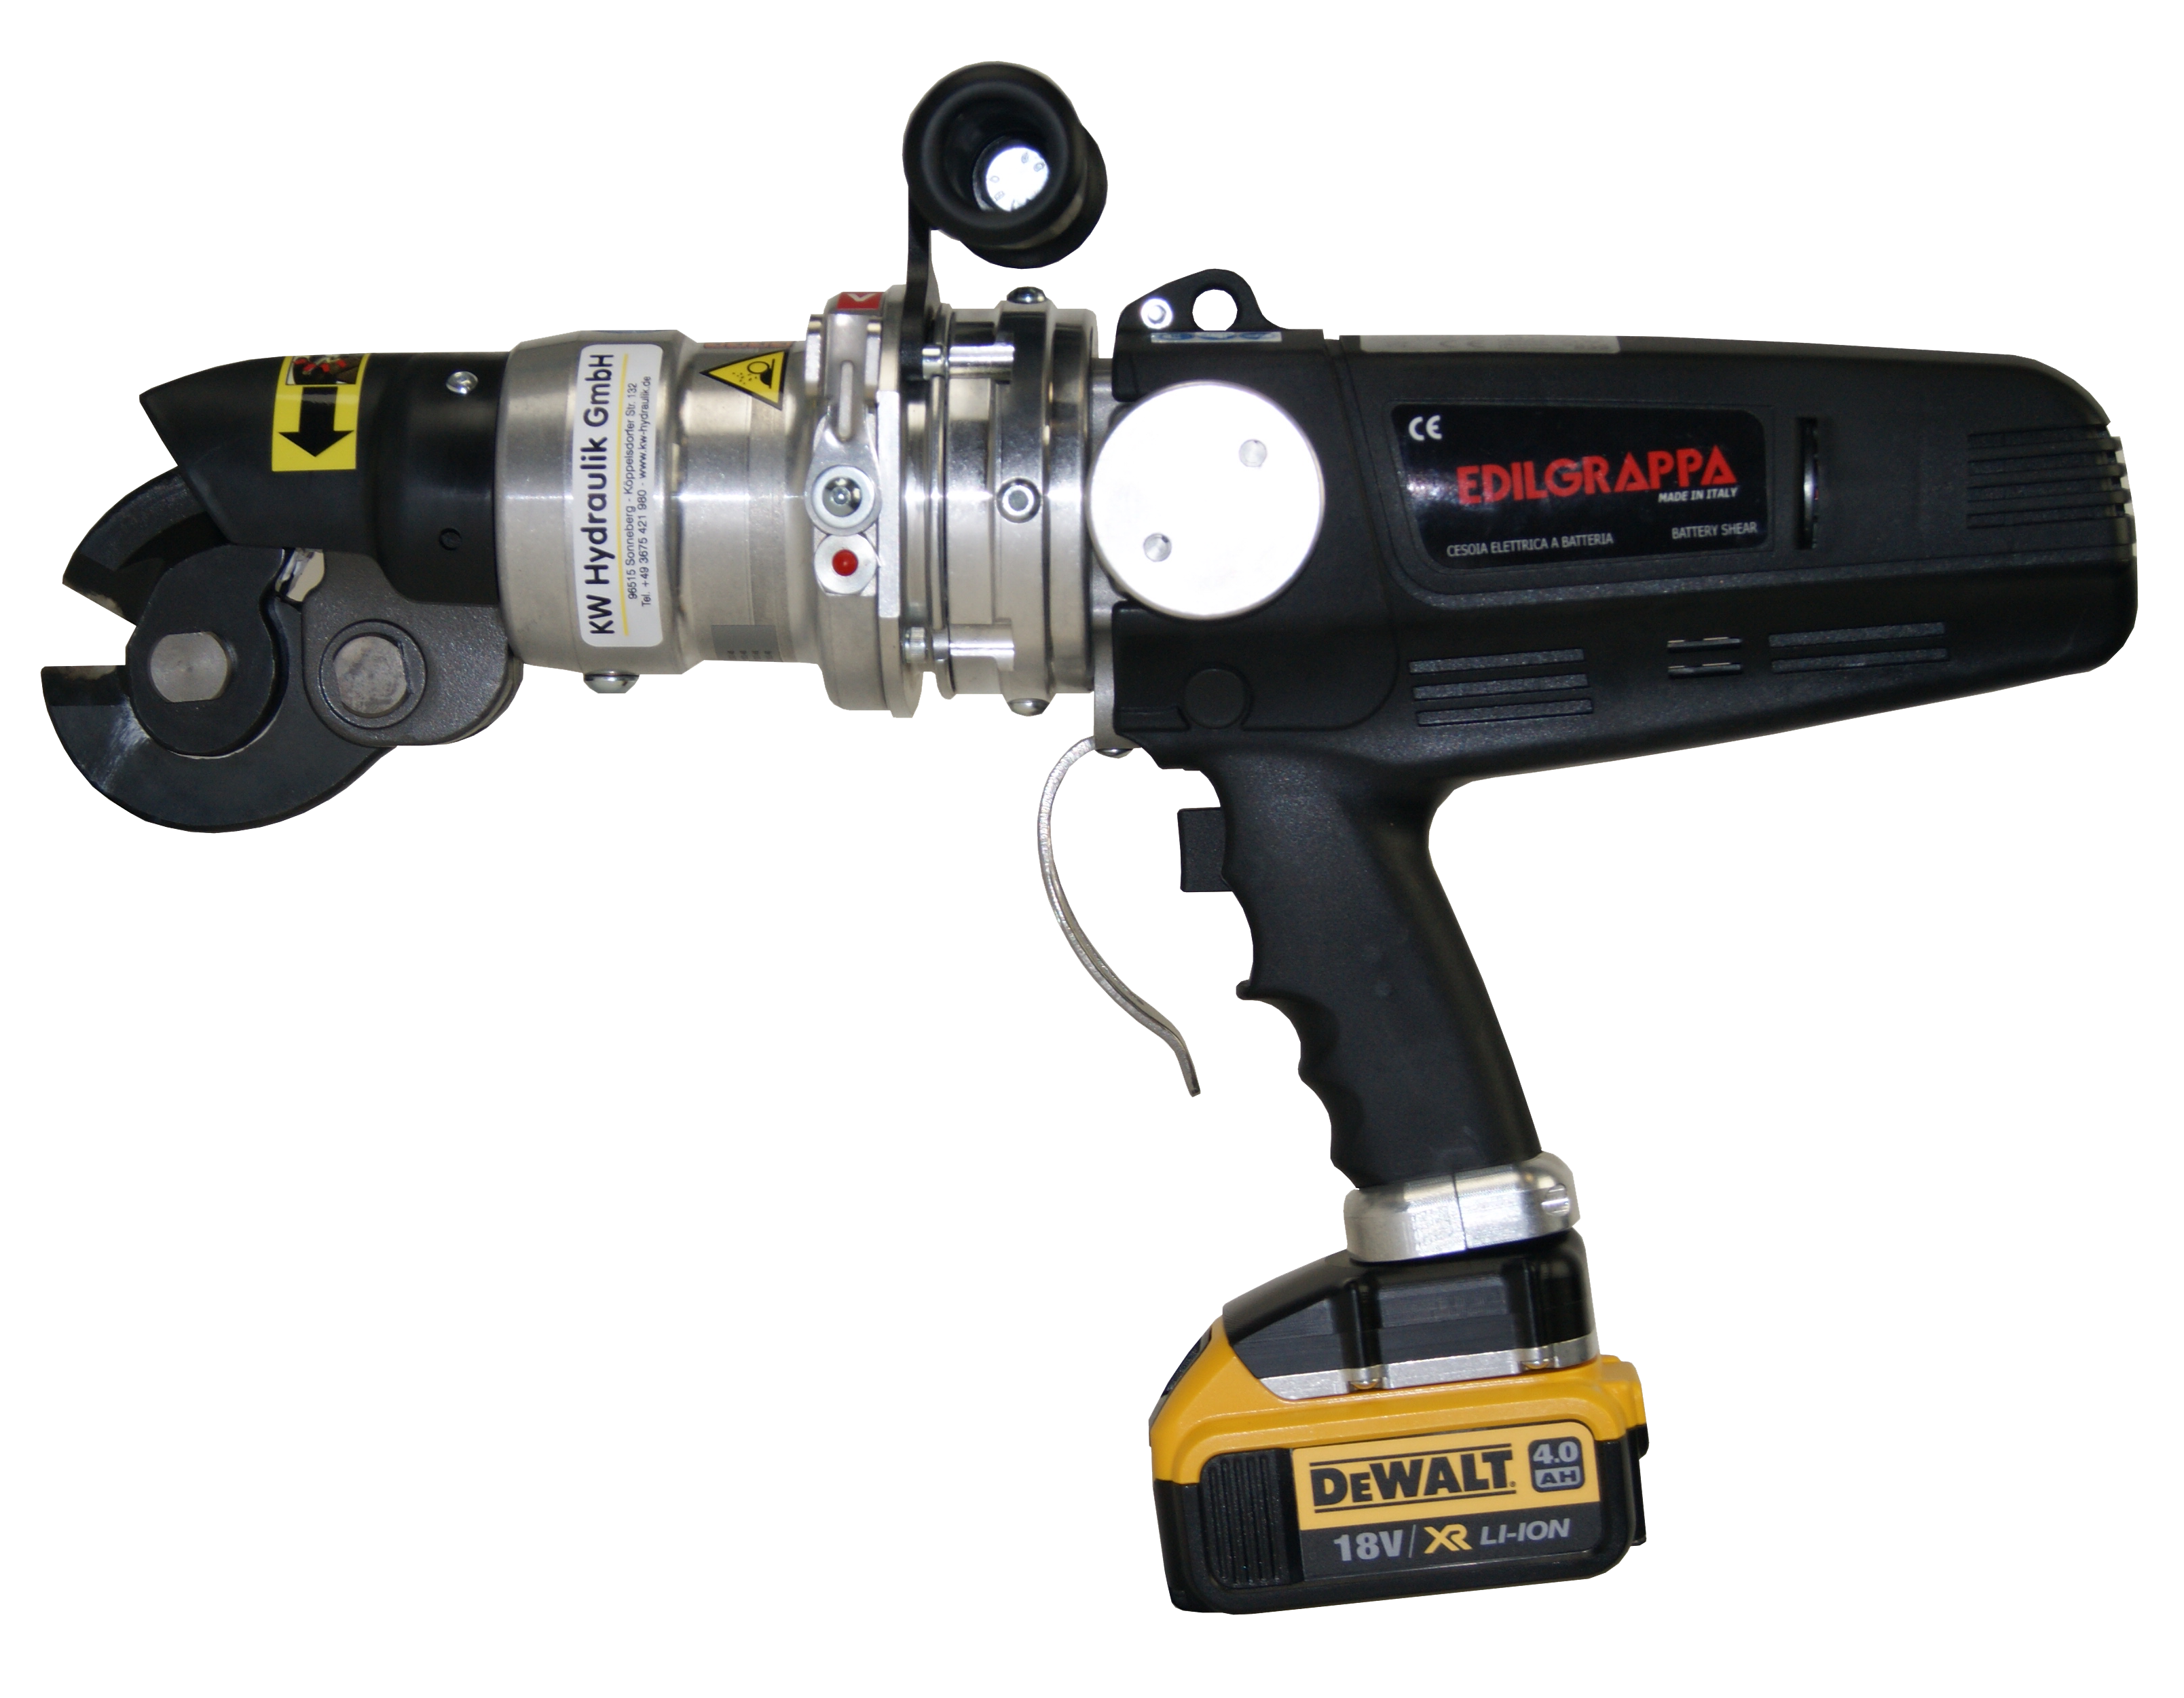 PC12-D18V - Battery-powered hydraulic steel cutter, 12 mm